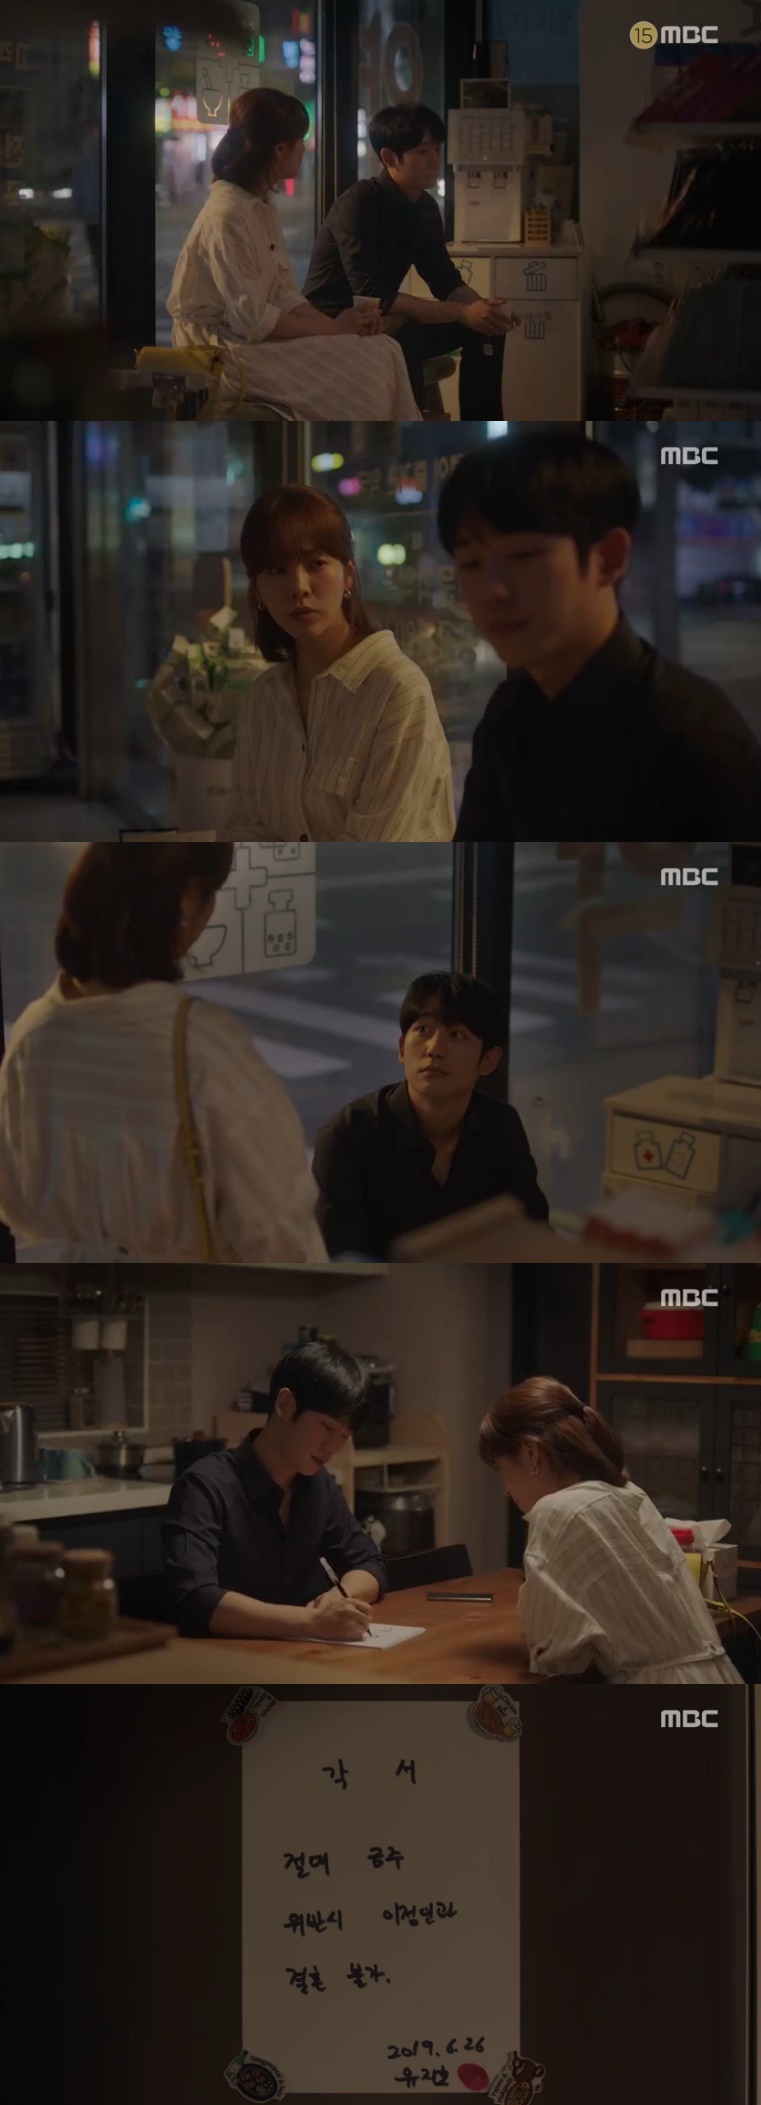 Spring Night Jung Hae In wrote the taboo.In MBC tree drama Spring Night, which was broadcast on the afternoon of the 11th, Yoo Ji-Ho (Jung Hae In), who wrote a memorandum of abstinence by Lee Jung-in, was drawn.Yoo Ji-Ho and Lee Jung-in sat in a pharmacy late at night and talked. Lee Jung-in asked, Did you even think bad about Jung Eun-woo?You controlled me, said Yoo Ji-Ho. Life. Action. Horse. Even thought. Ive endured it. If Ive never thought of it before, Im lying.Its hard to believe, but I dont really have any feelings. Sometimes its sad. Even on a drunken day...Lee said, Good job, Jung Eun-woo, but I think Mr. Ji-ho wanted to comfort himself. Then, Lee said, Thank you to Yoo Ji-Hos appreciation.I would have been sad, but I comforted my heart. Yoo Ji-Ho, who went to Lee Jung-ins house on the spot, wrote a memorandum of abstinence at the end of Lee Jung-in, Absolutely abstinence.Meanwhile, Spring Night is a romance drama about the process of two people who accidentally encounter each other in a pharmacy one spring day. Followed by New Employee Saving from 17th.Photo  MBC Broadcasting Screen